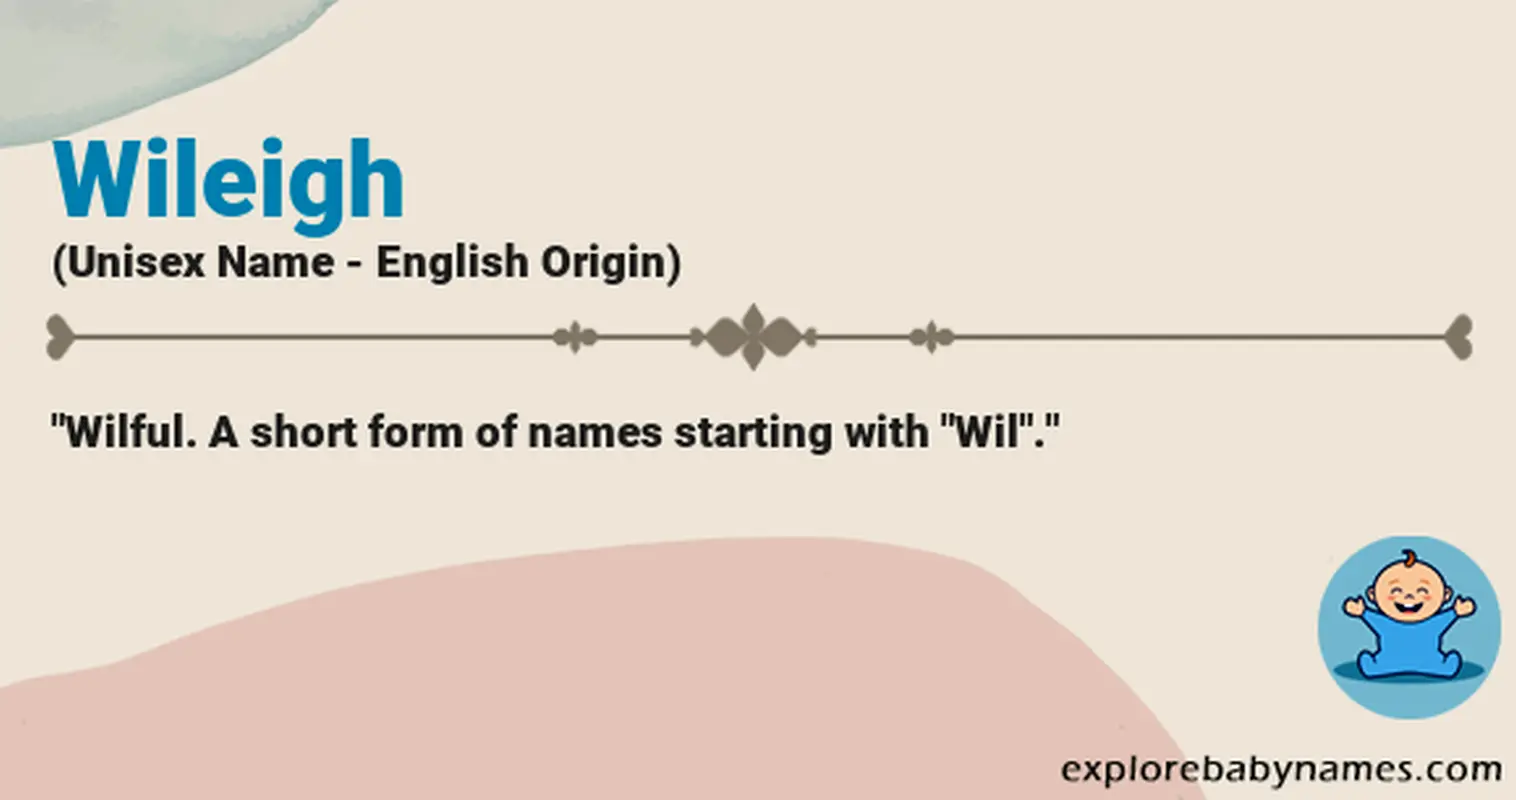 Meaning of Wileigh